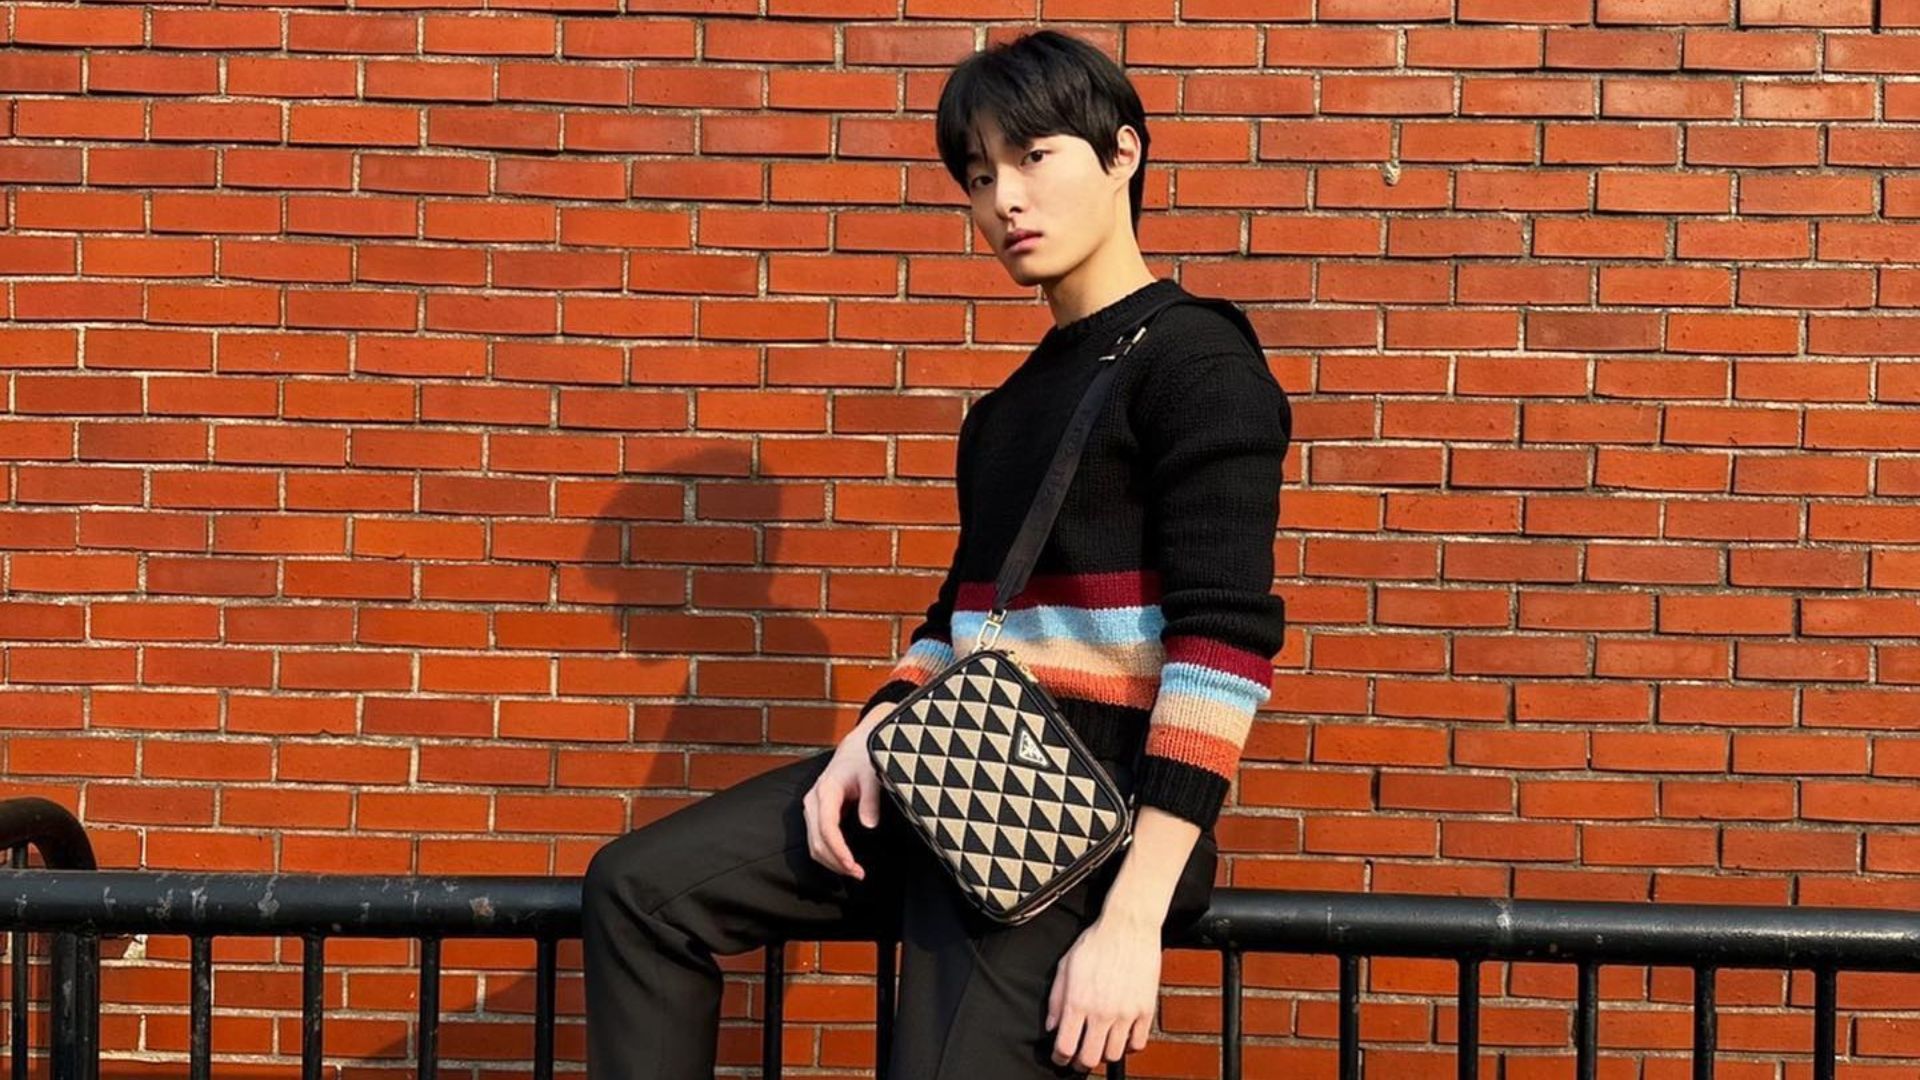 Korean celebrities represent luxury fashion brands, and fans take notice